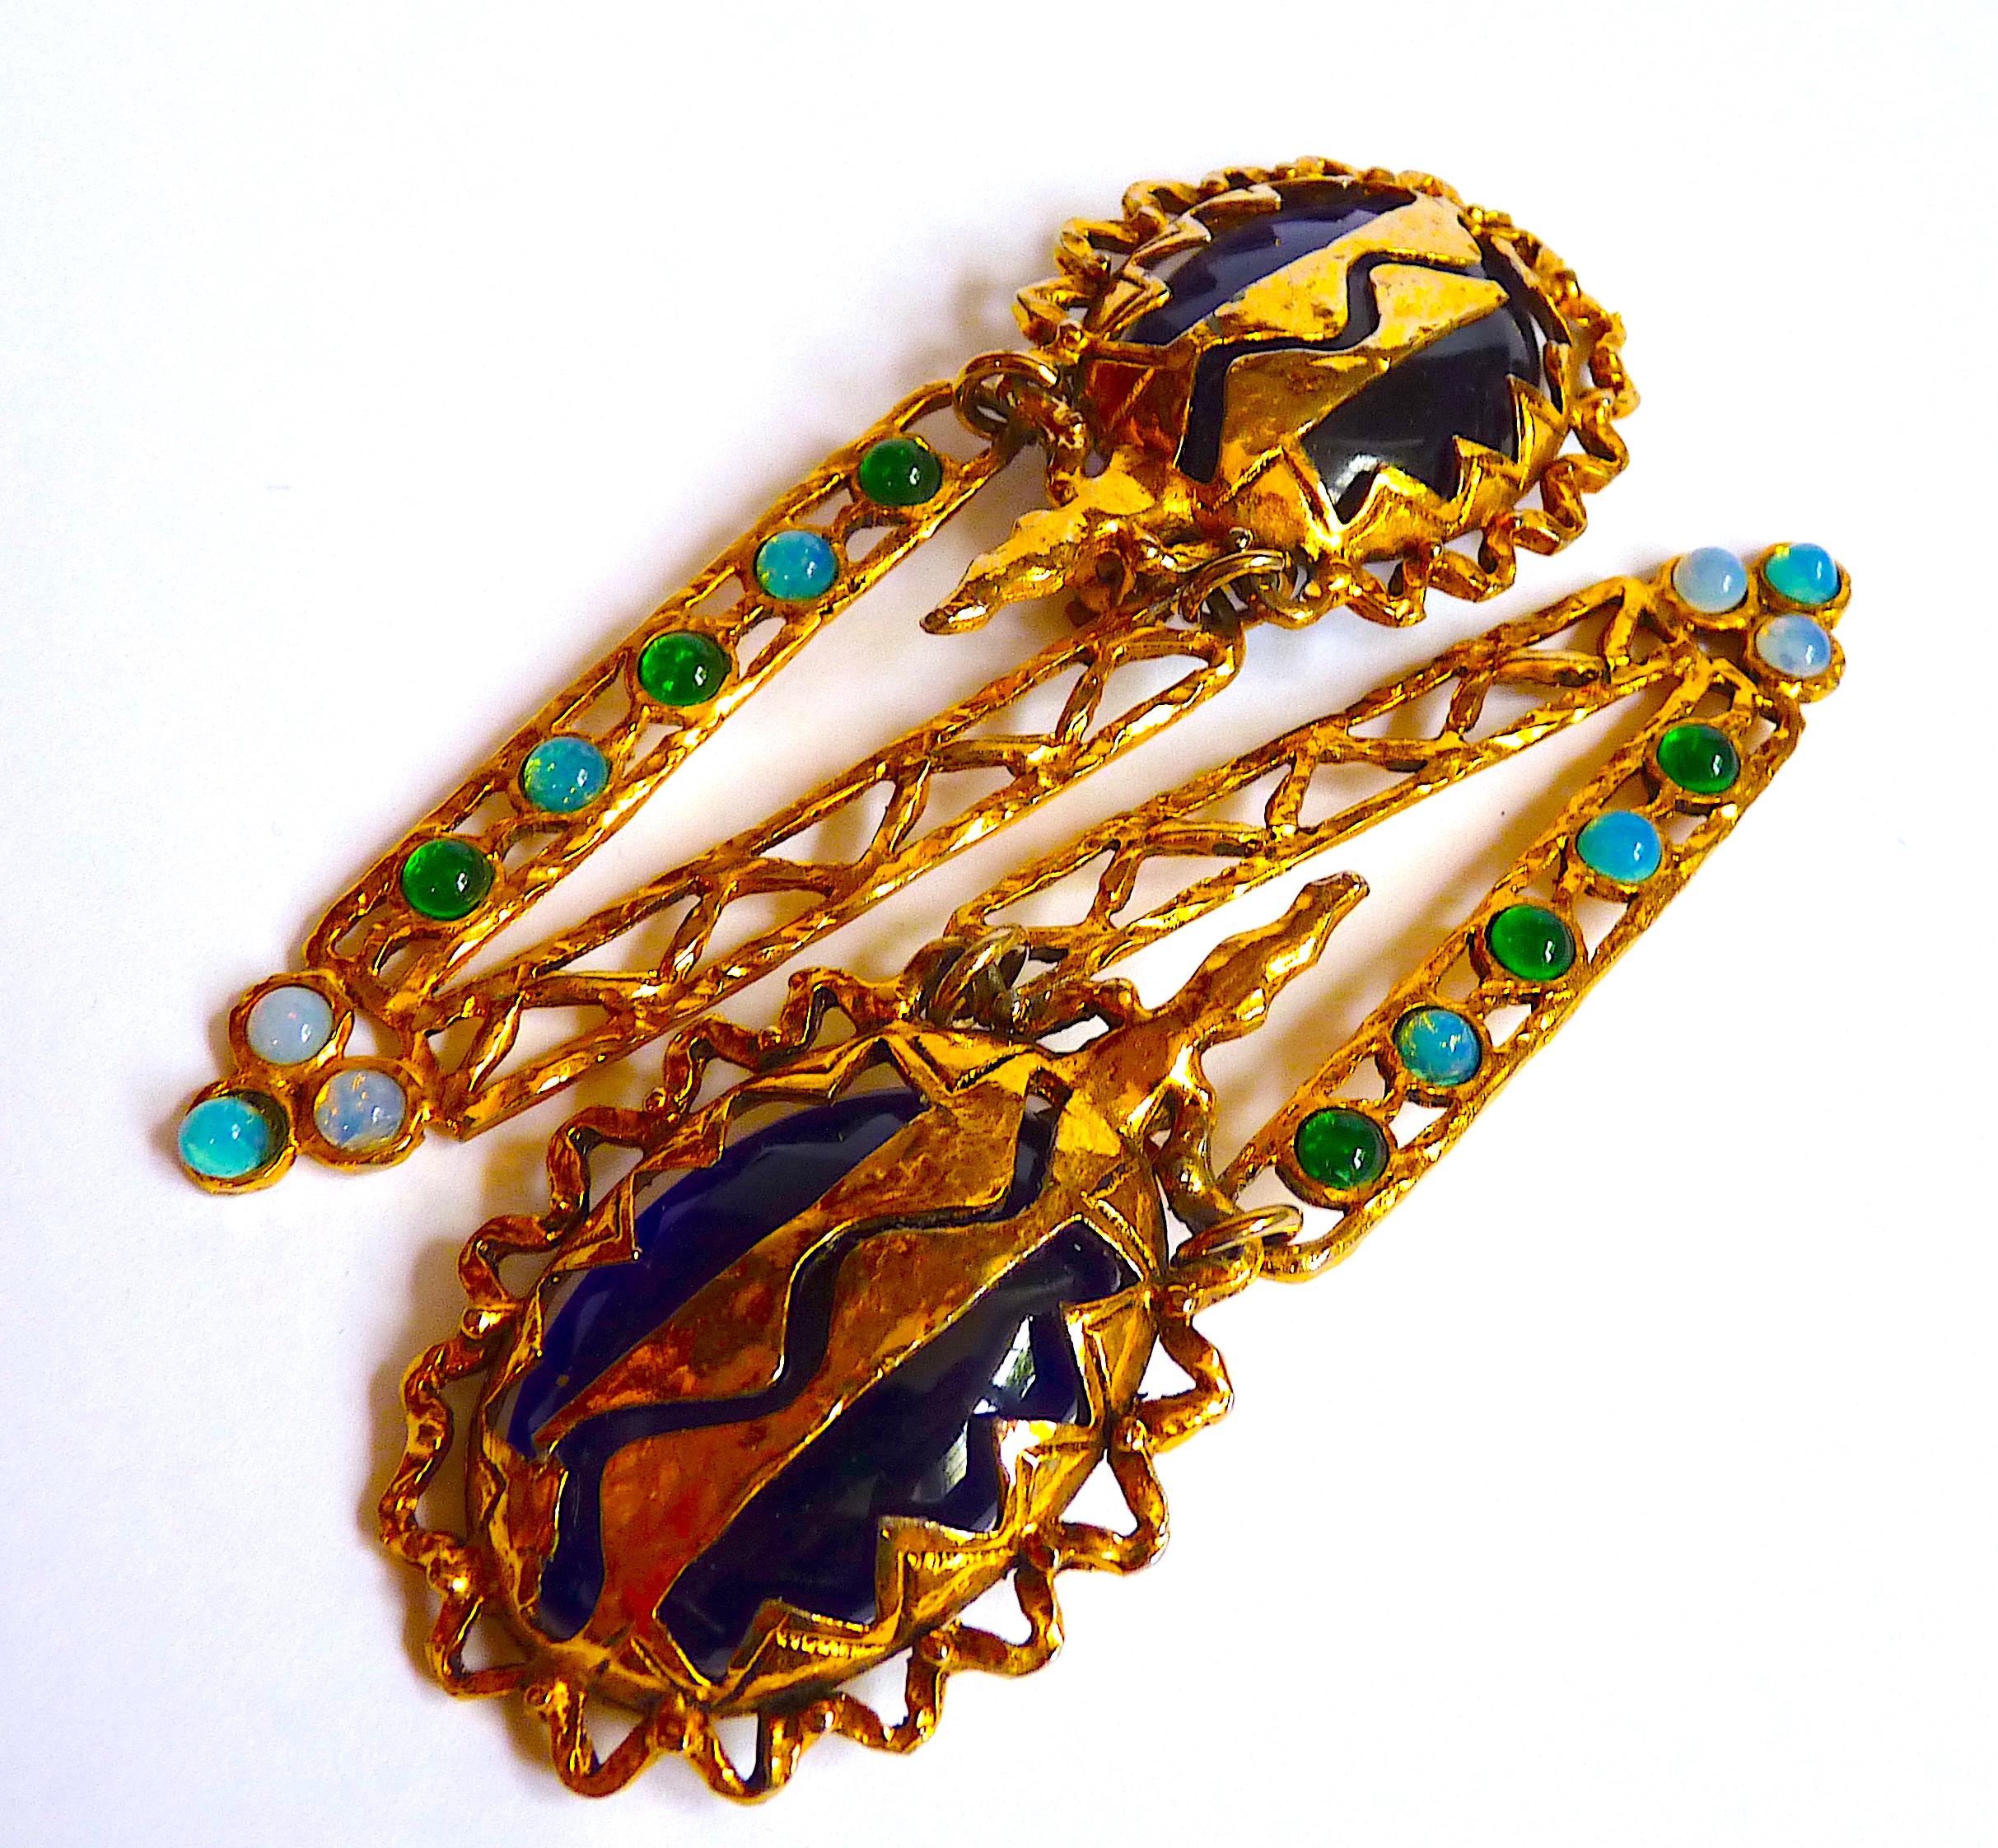 Very Long Claire Deve Pendants, Vintage from the 80's, with a large blue glass cabochon adorned with gilt metal, and a very long gilt metal pendant with small blue-green cabochons

Signed CLAIRE DEVE PARIS at back of 1 clip

CONDITION : Very nice